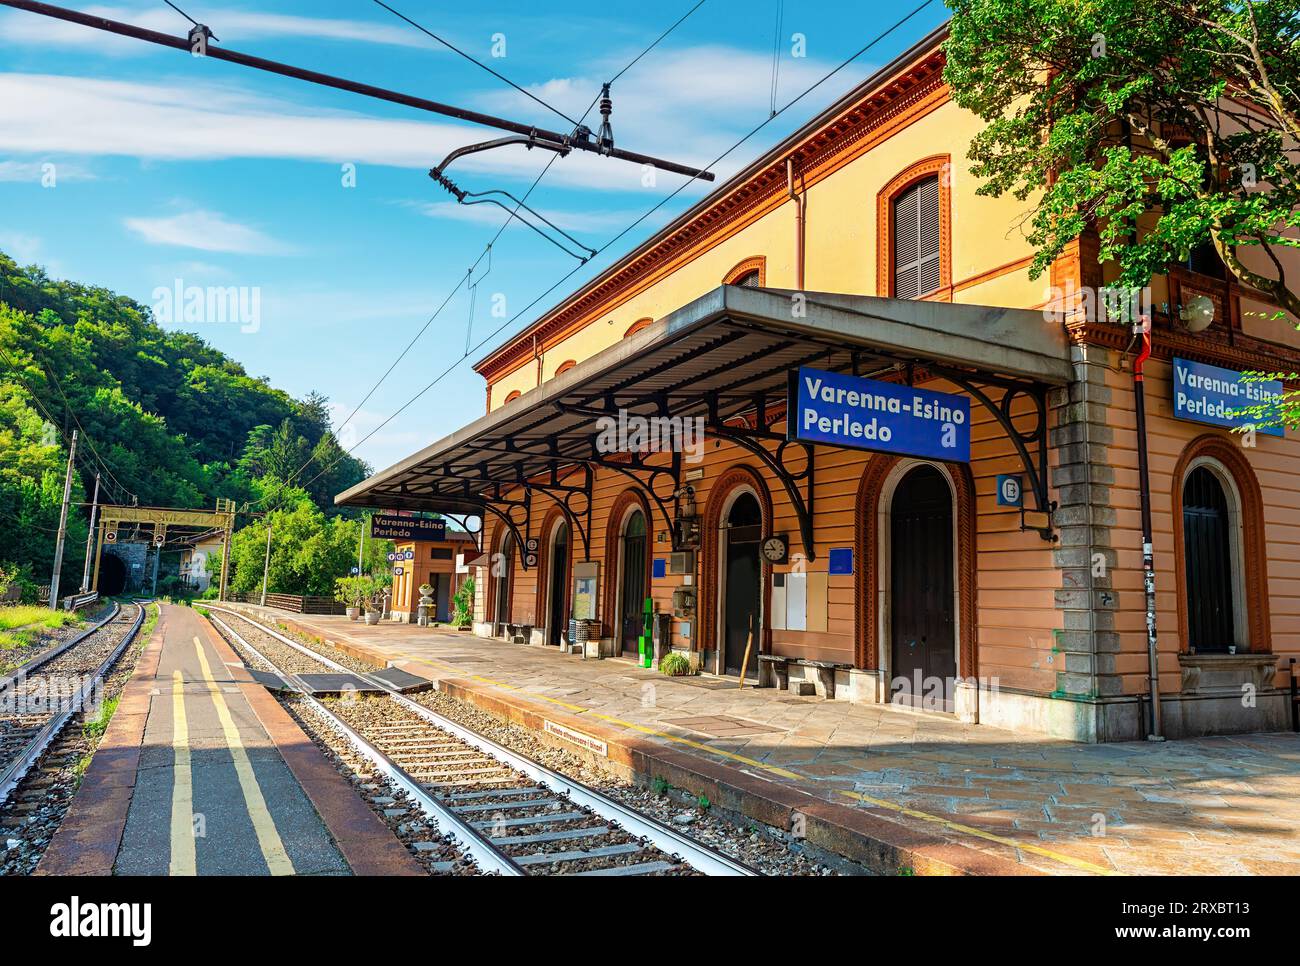 View of the platforms of Varenna-Esino Porledo railway station at Perledo, on the Tirano-Lecco railway in Lombardy, in northern Italy Stock Photo